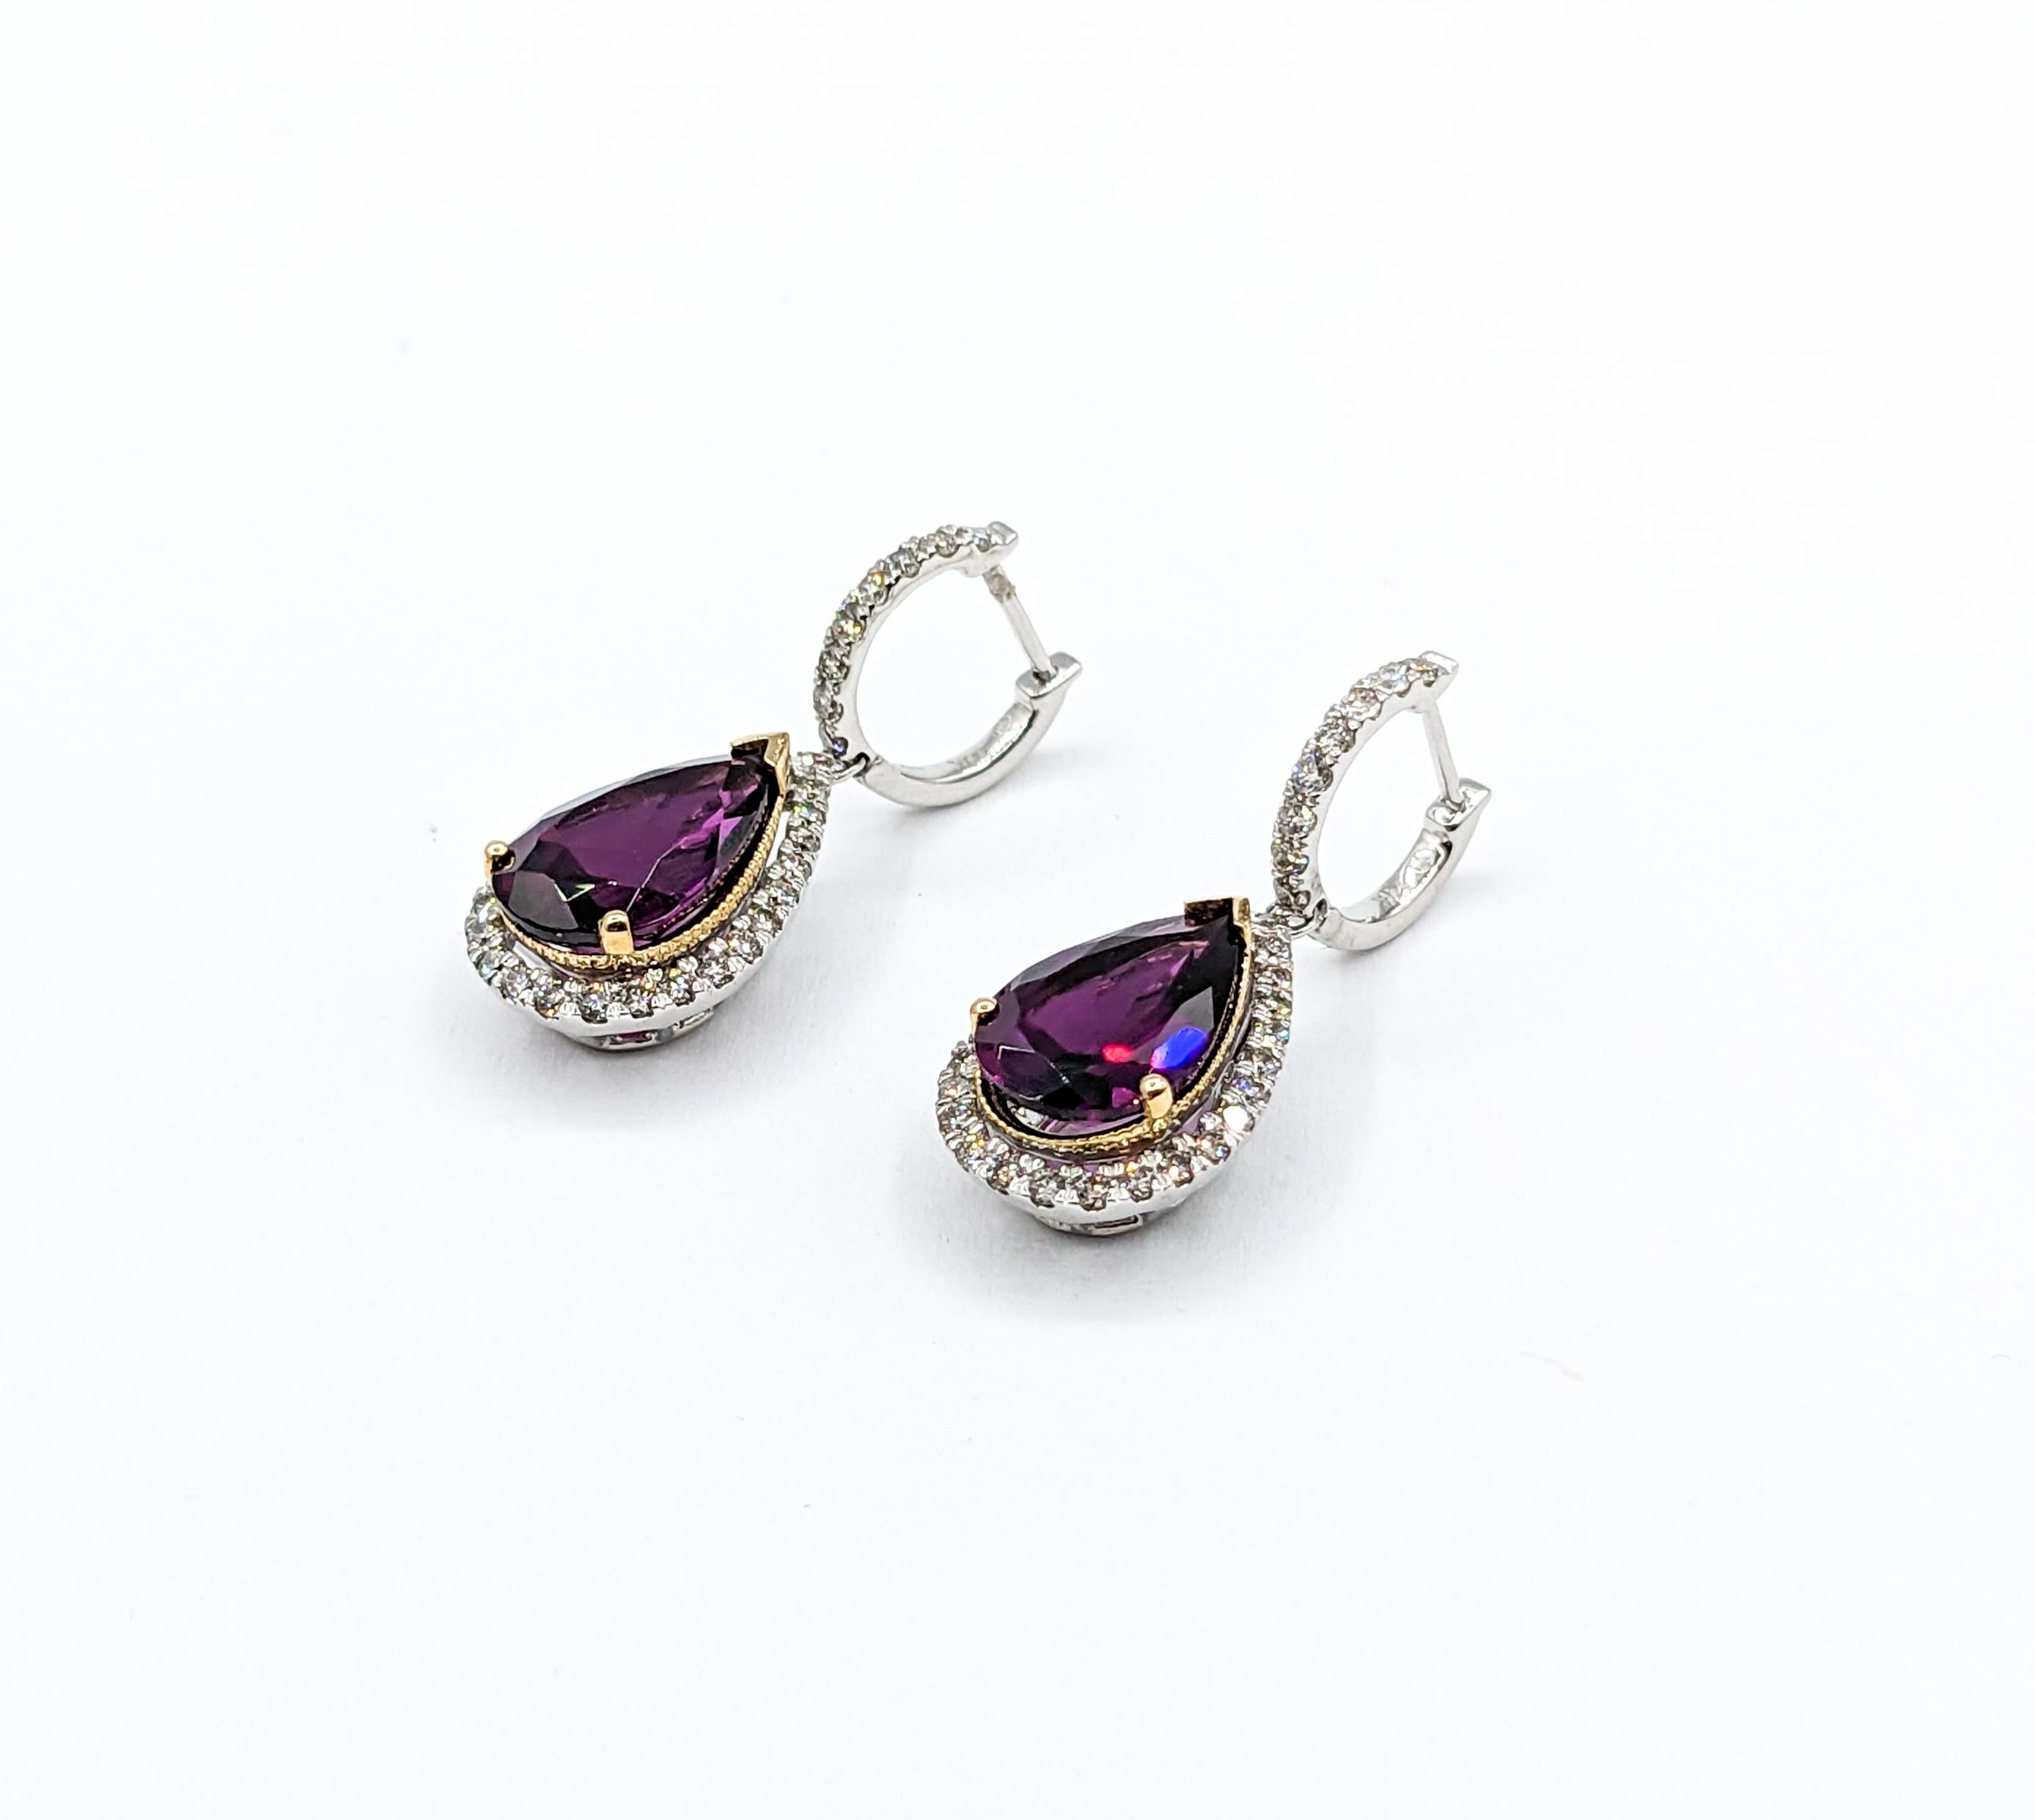 Luscious Rhodolite Garnet & Diamond Drop Earrings

Presenting an exquisite pair of earring, masterfully crafted in Rhodolite Garnet pear earrings in 14k white gold with yellow gold accents. These earrings feature gorgeous pair of pear shaped